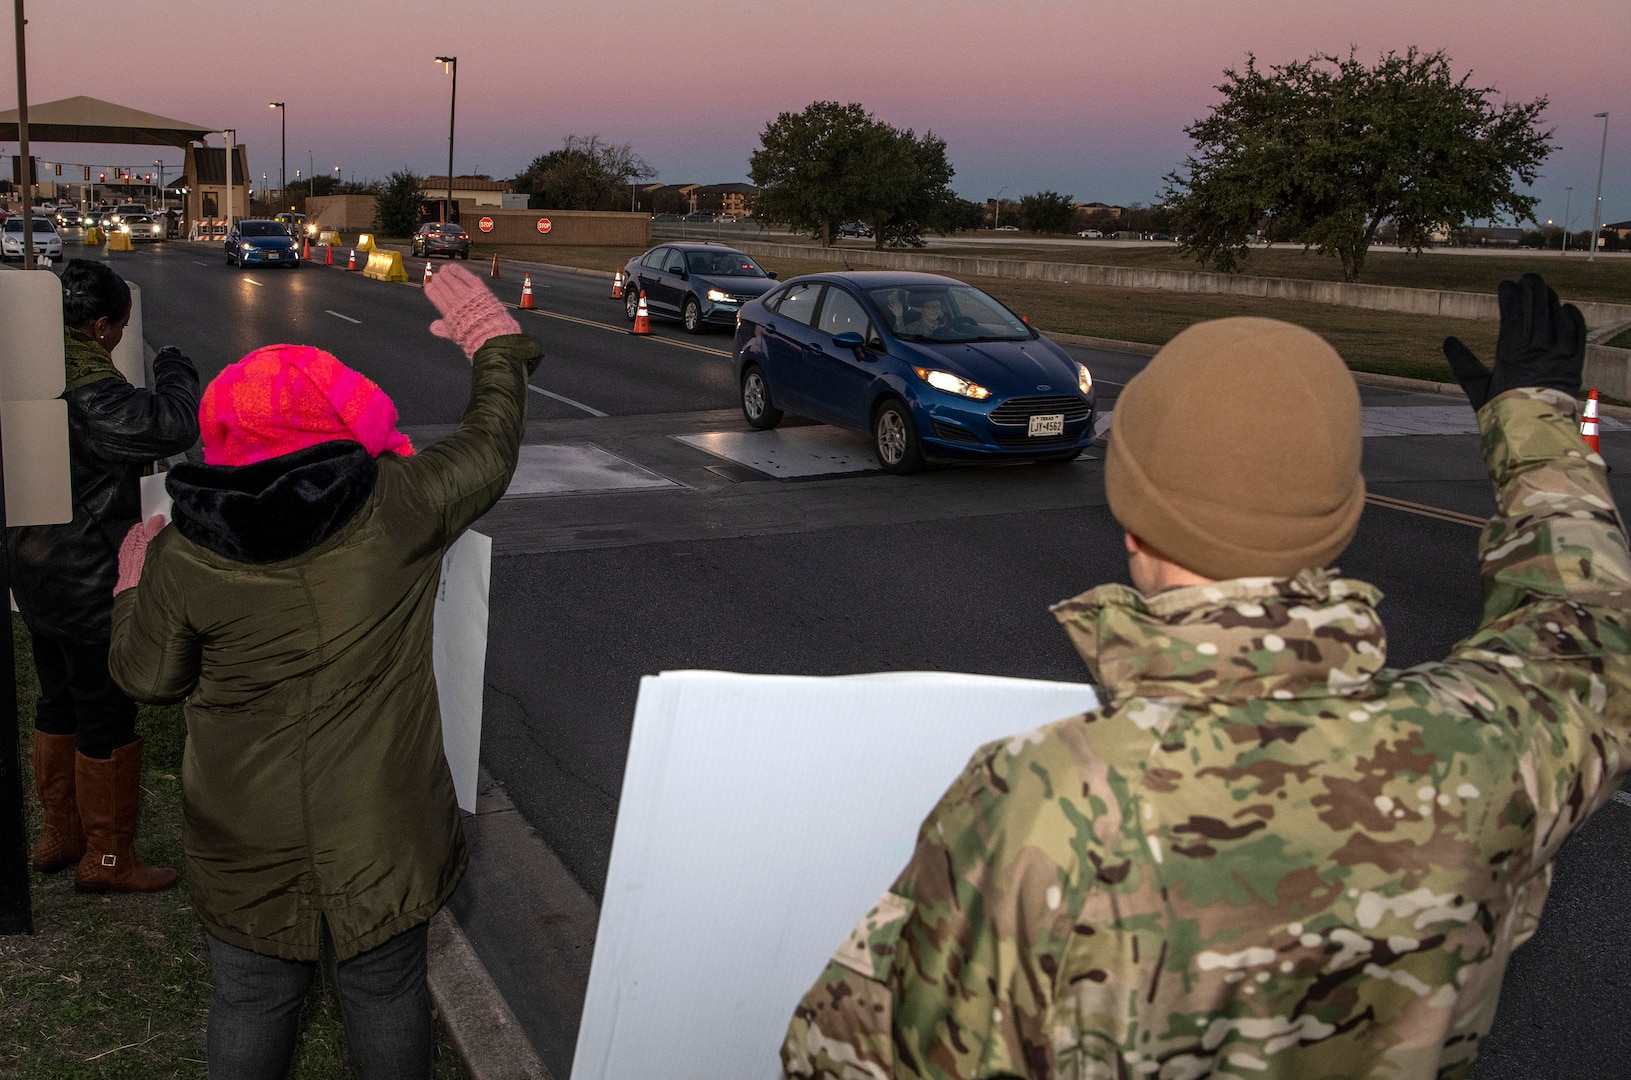 37th Training Wing military and civilian members hold positive messages of support at base gates during the morning inbound commute as part of their new initiative, “We Care,” at Joint Base San Antonio-Lackland, Texas, Dec. 18, 2019. The initiative involved 37th Training Wing military and civilian members spending the morning at various gates letting each person know that they stand together in support of those struggling with depression and thoughts of suicide by holding a positive message of support and handing out over 400 candy canes. If you are struggling with thoughts of suicide, please go directly to the Mental Health Clinic or to your closest Emergency Room. You can also reach the National Suicide Prevention Lifeline at 1-800-273-8255.